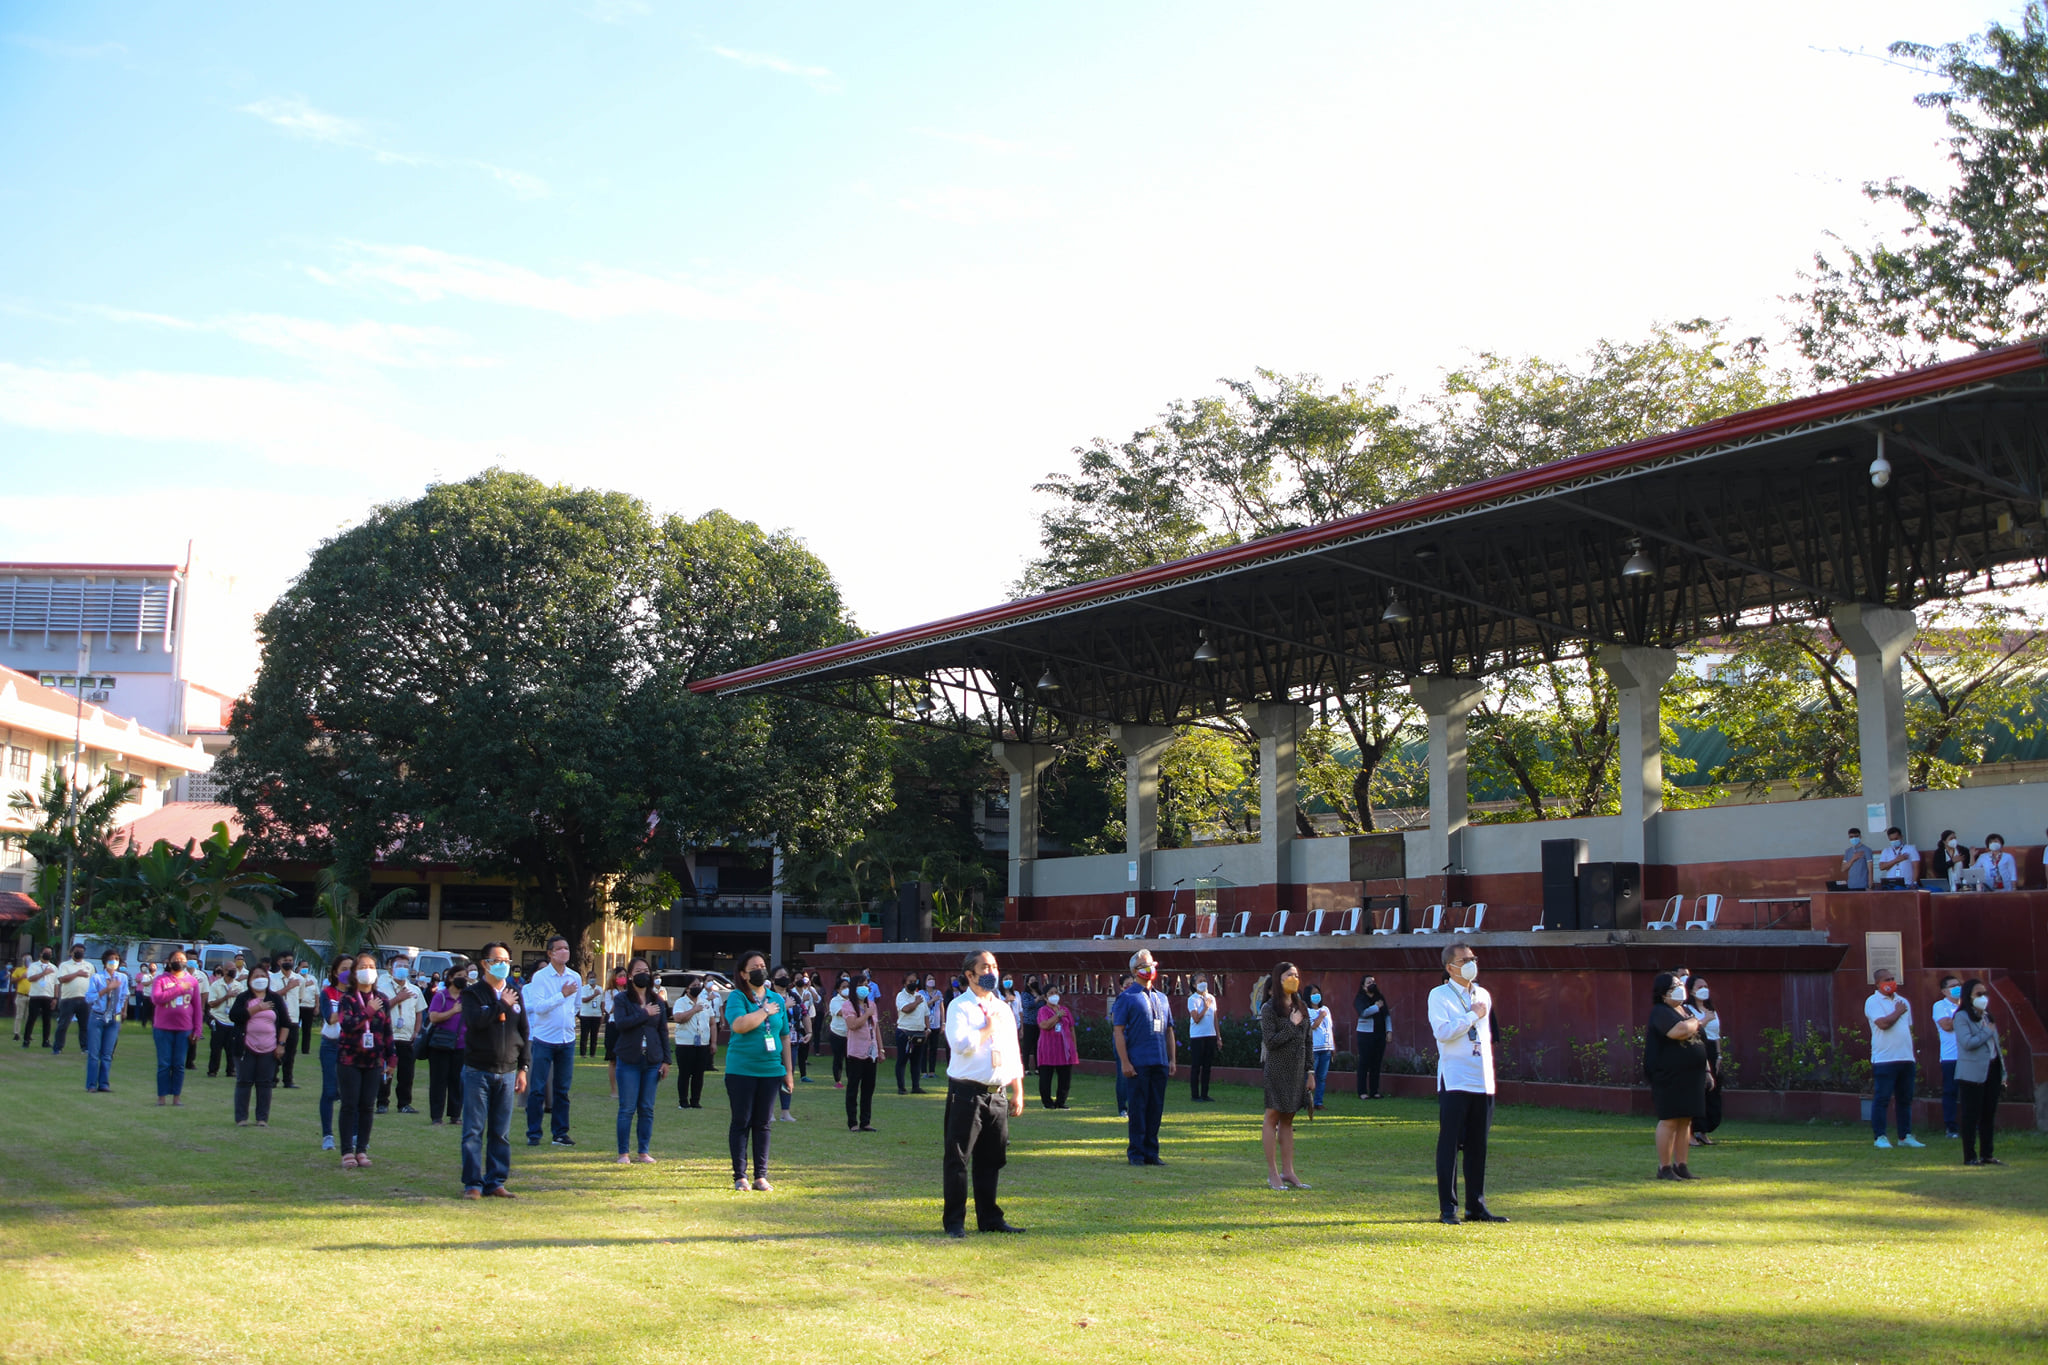 PLM mounts blended flag-raising ceremony with students, faculty, and staff